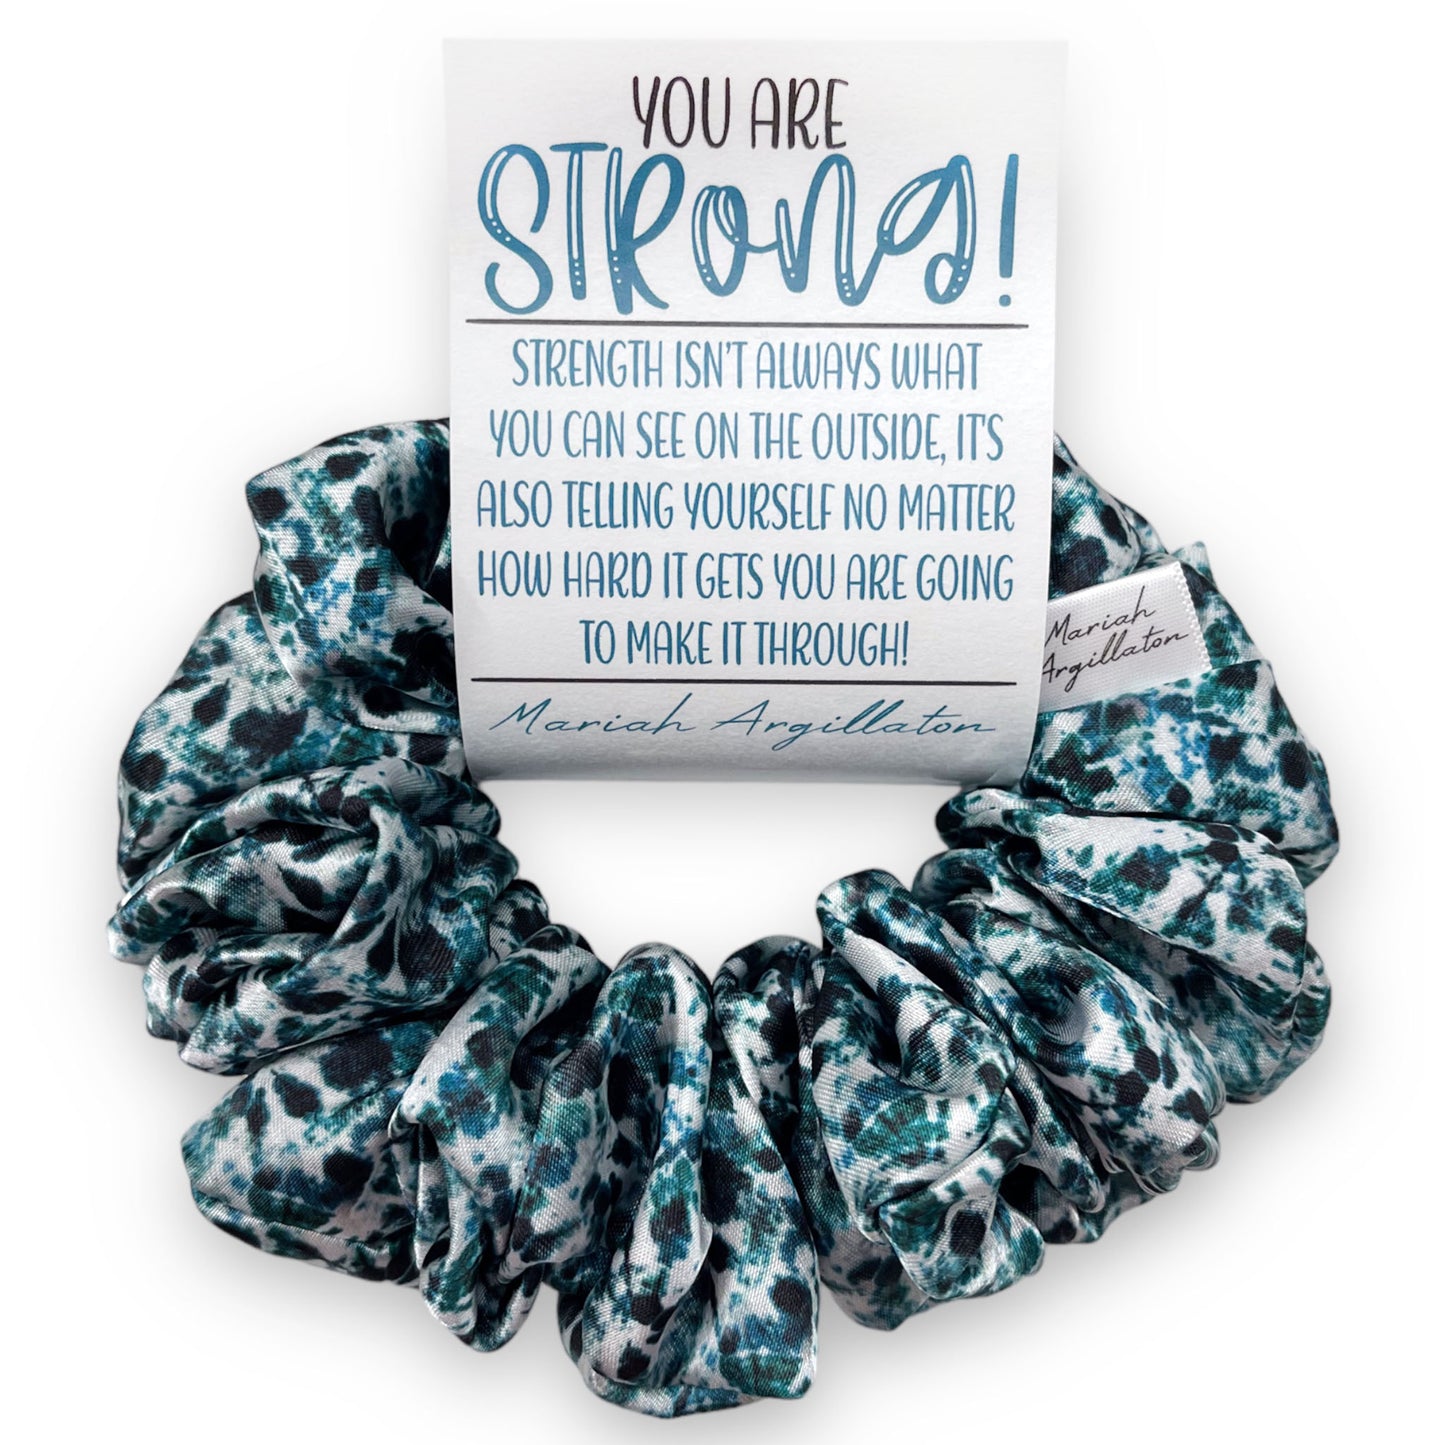 You Are Strong! Regular Scrunchie!